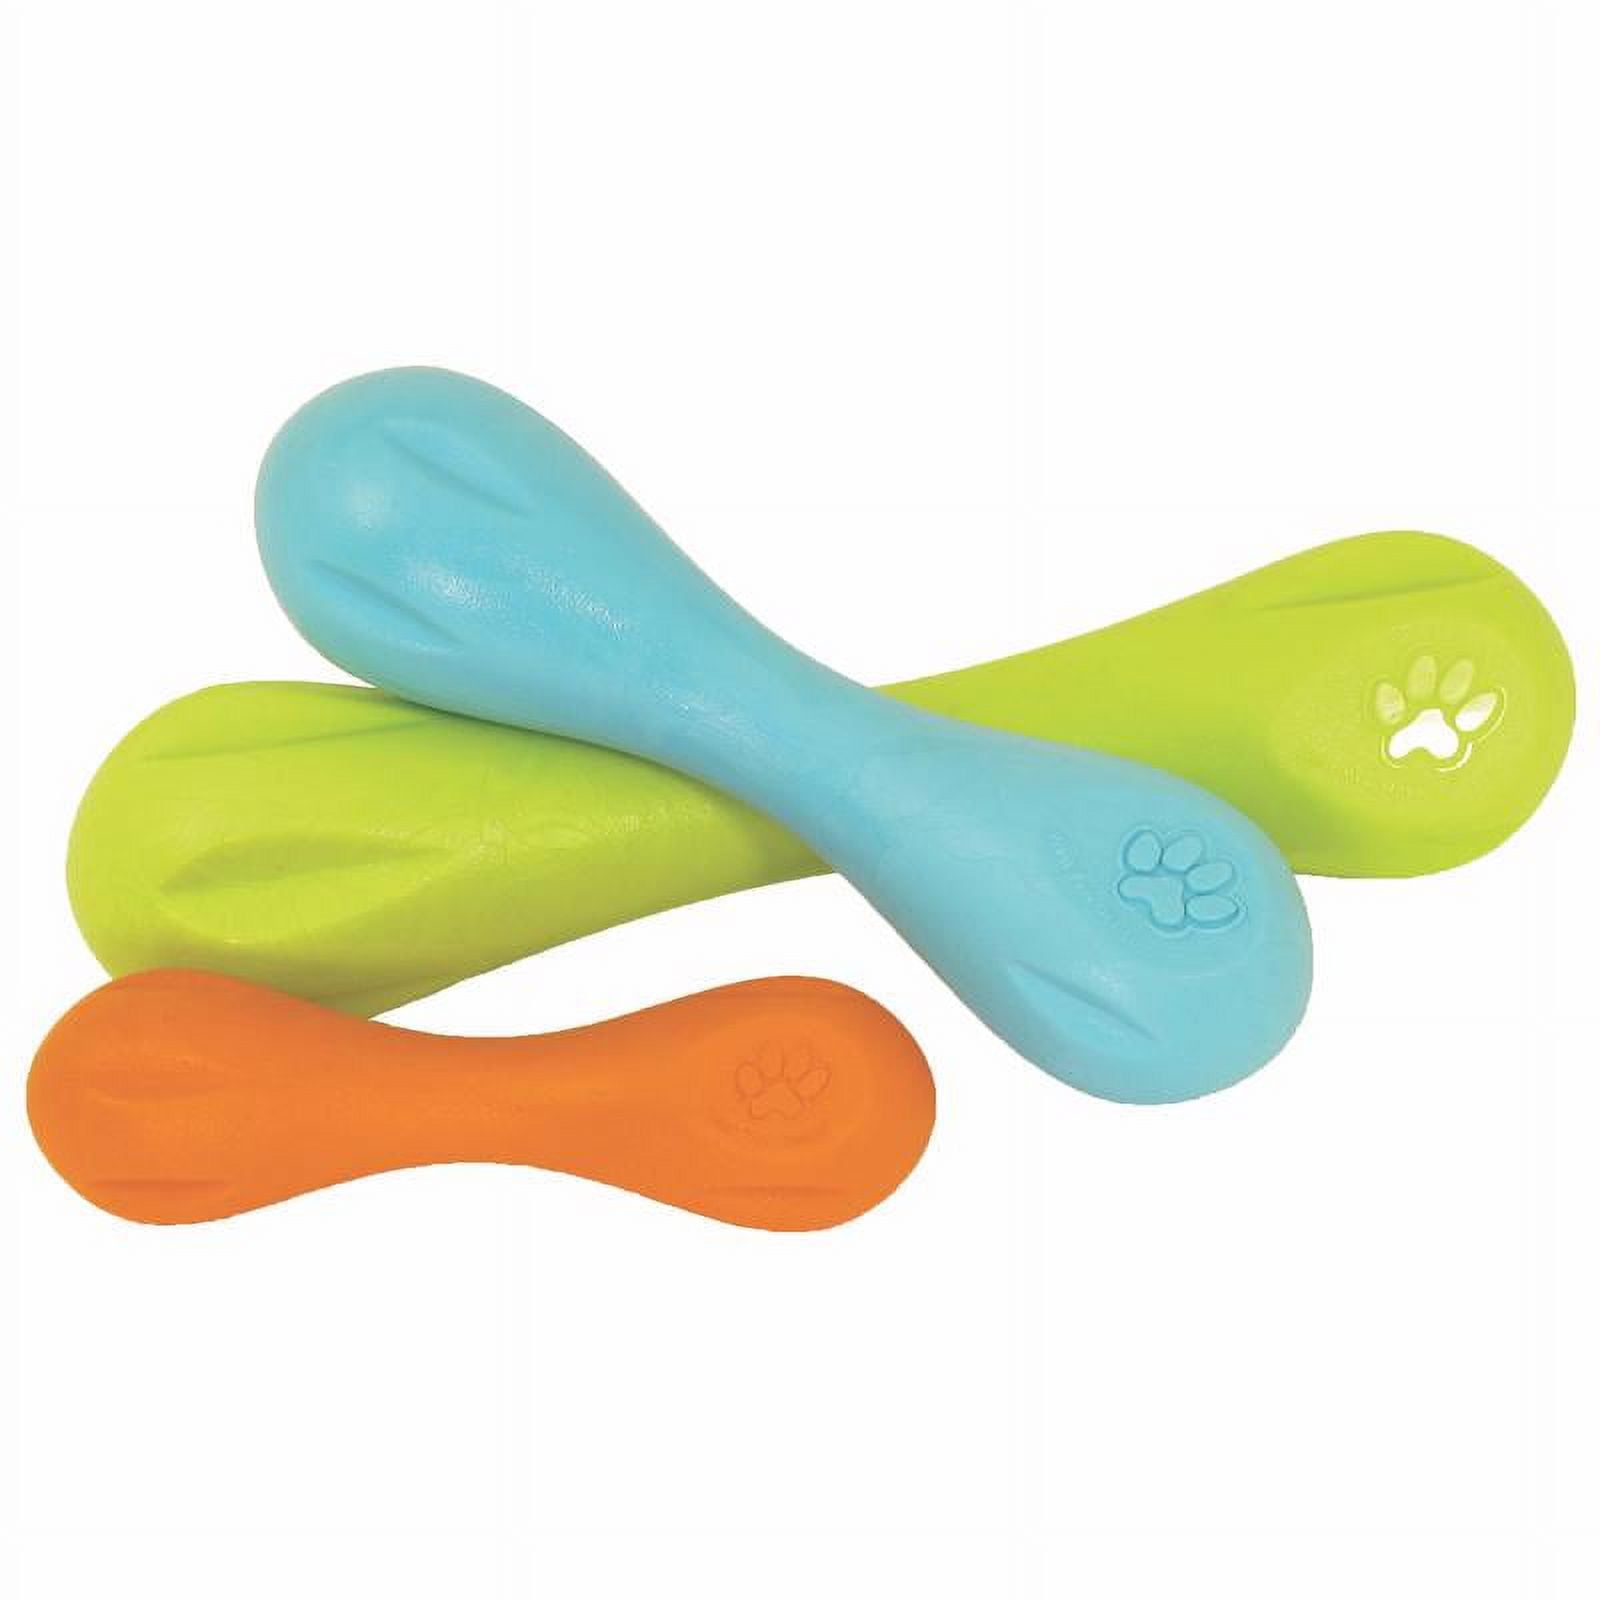 WEST PAW Zogoflex Rumpus Dog Chew Toy (Small, Tangerine) & Zogoflex Hurley  Dog Bone Chew Toy (Small, Aqua) – Floatable Pet Toys for Aggressive